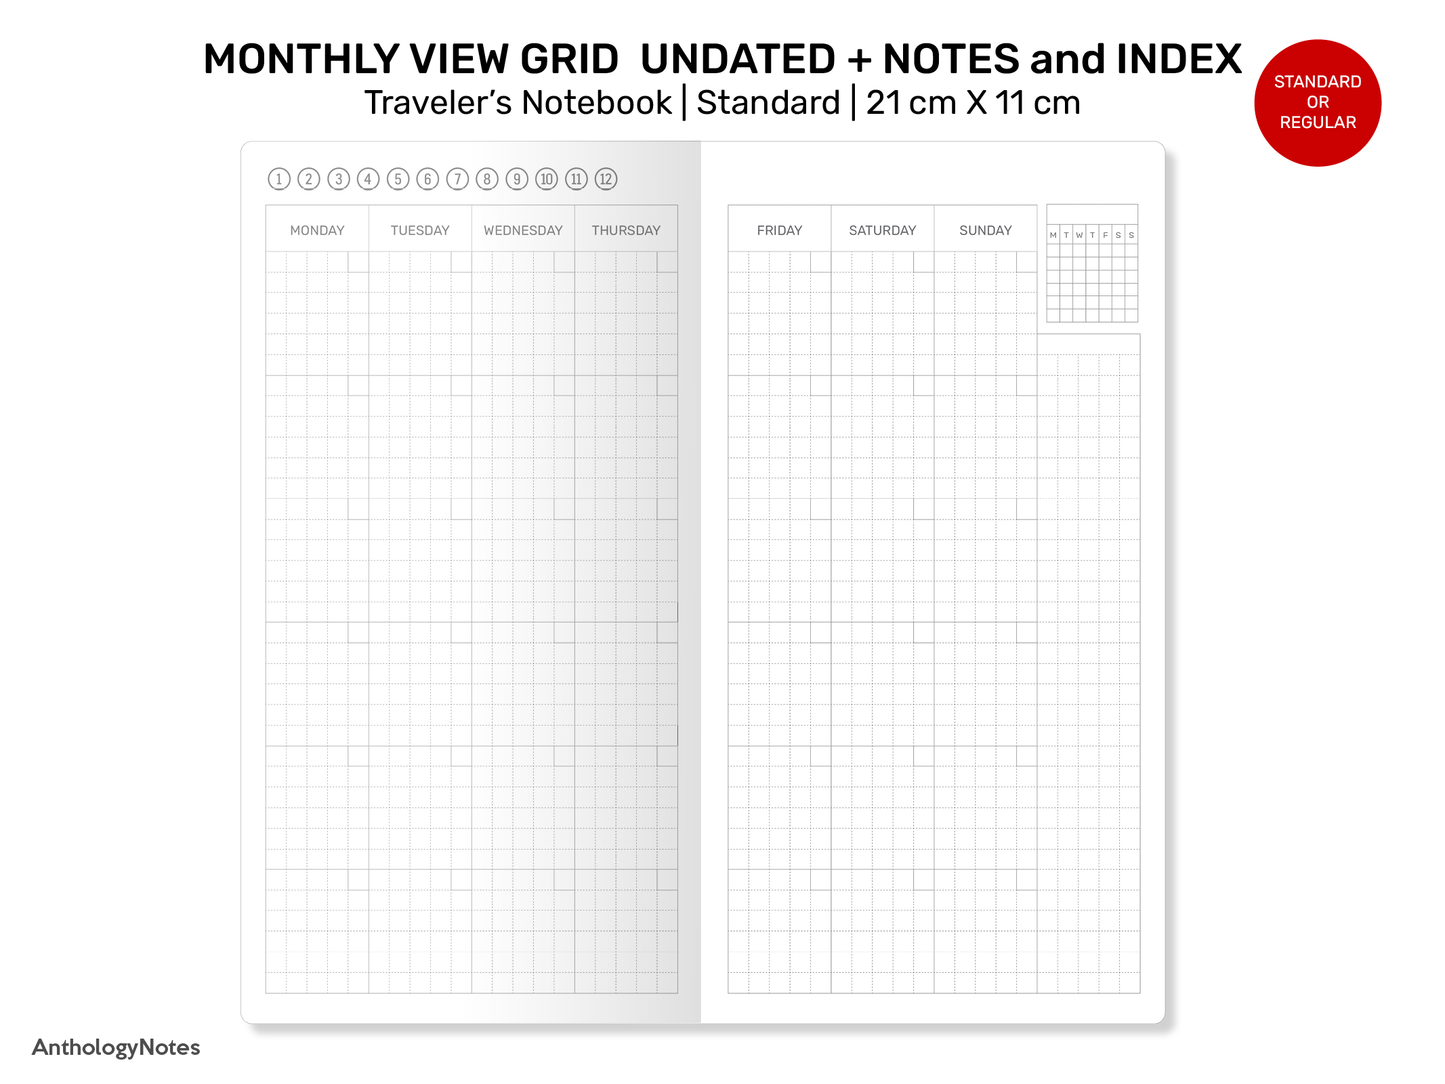 Standard TN Monthly GRID with EXTRA pages for Notes, Index Page Printable Traveler's Notebook Insert Minimalist RTN22-020